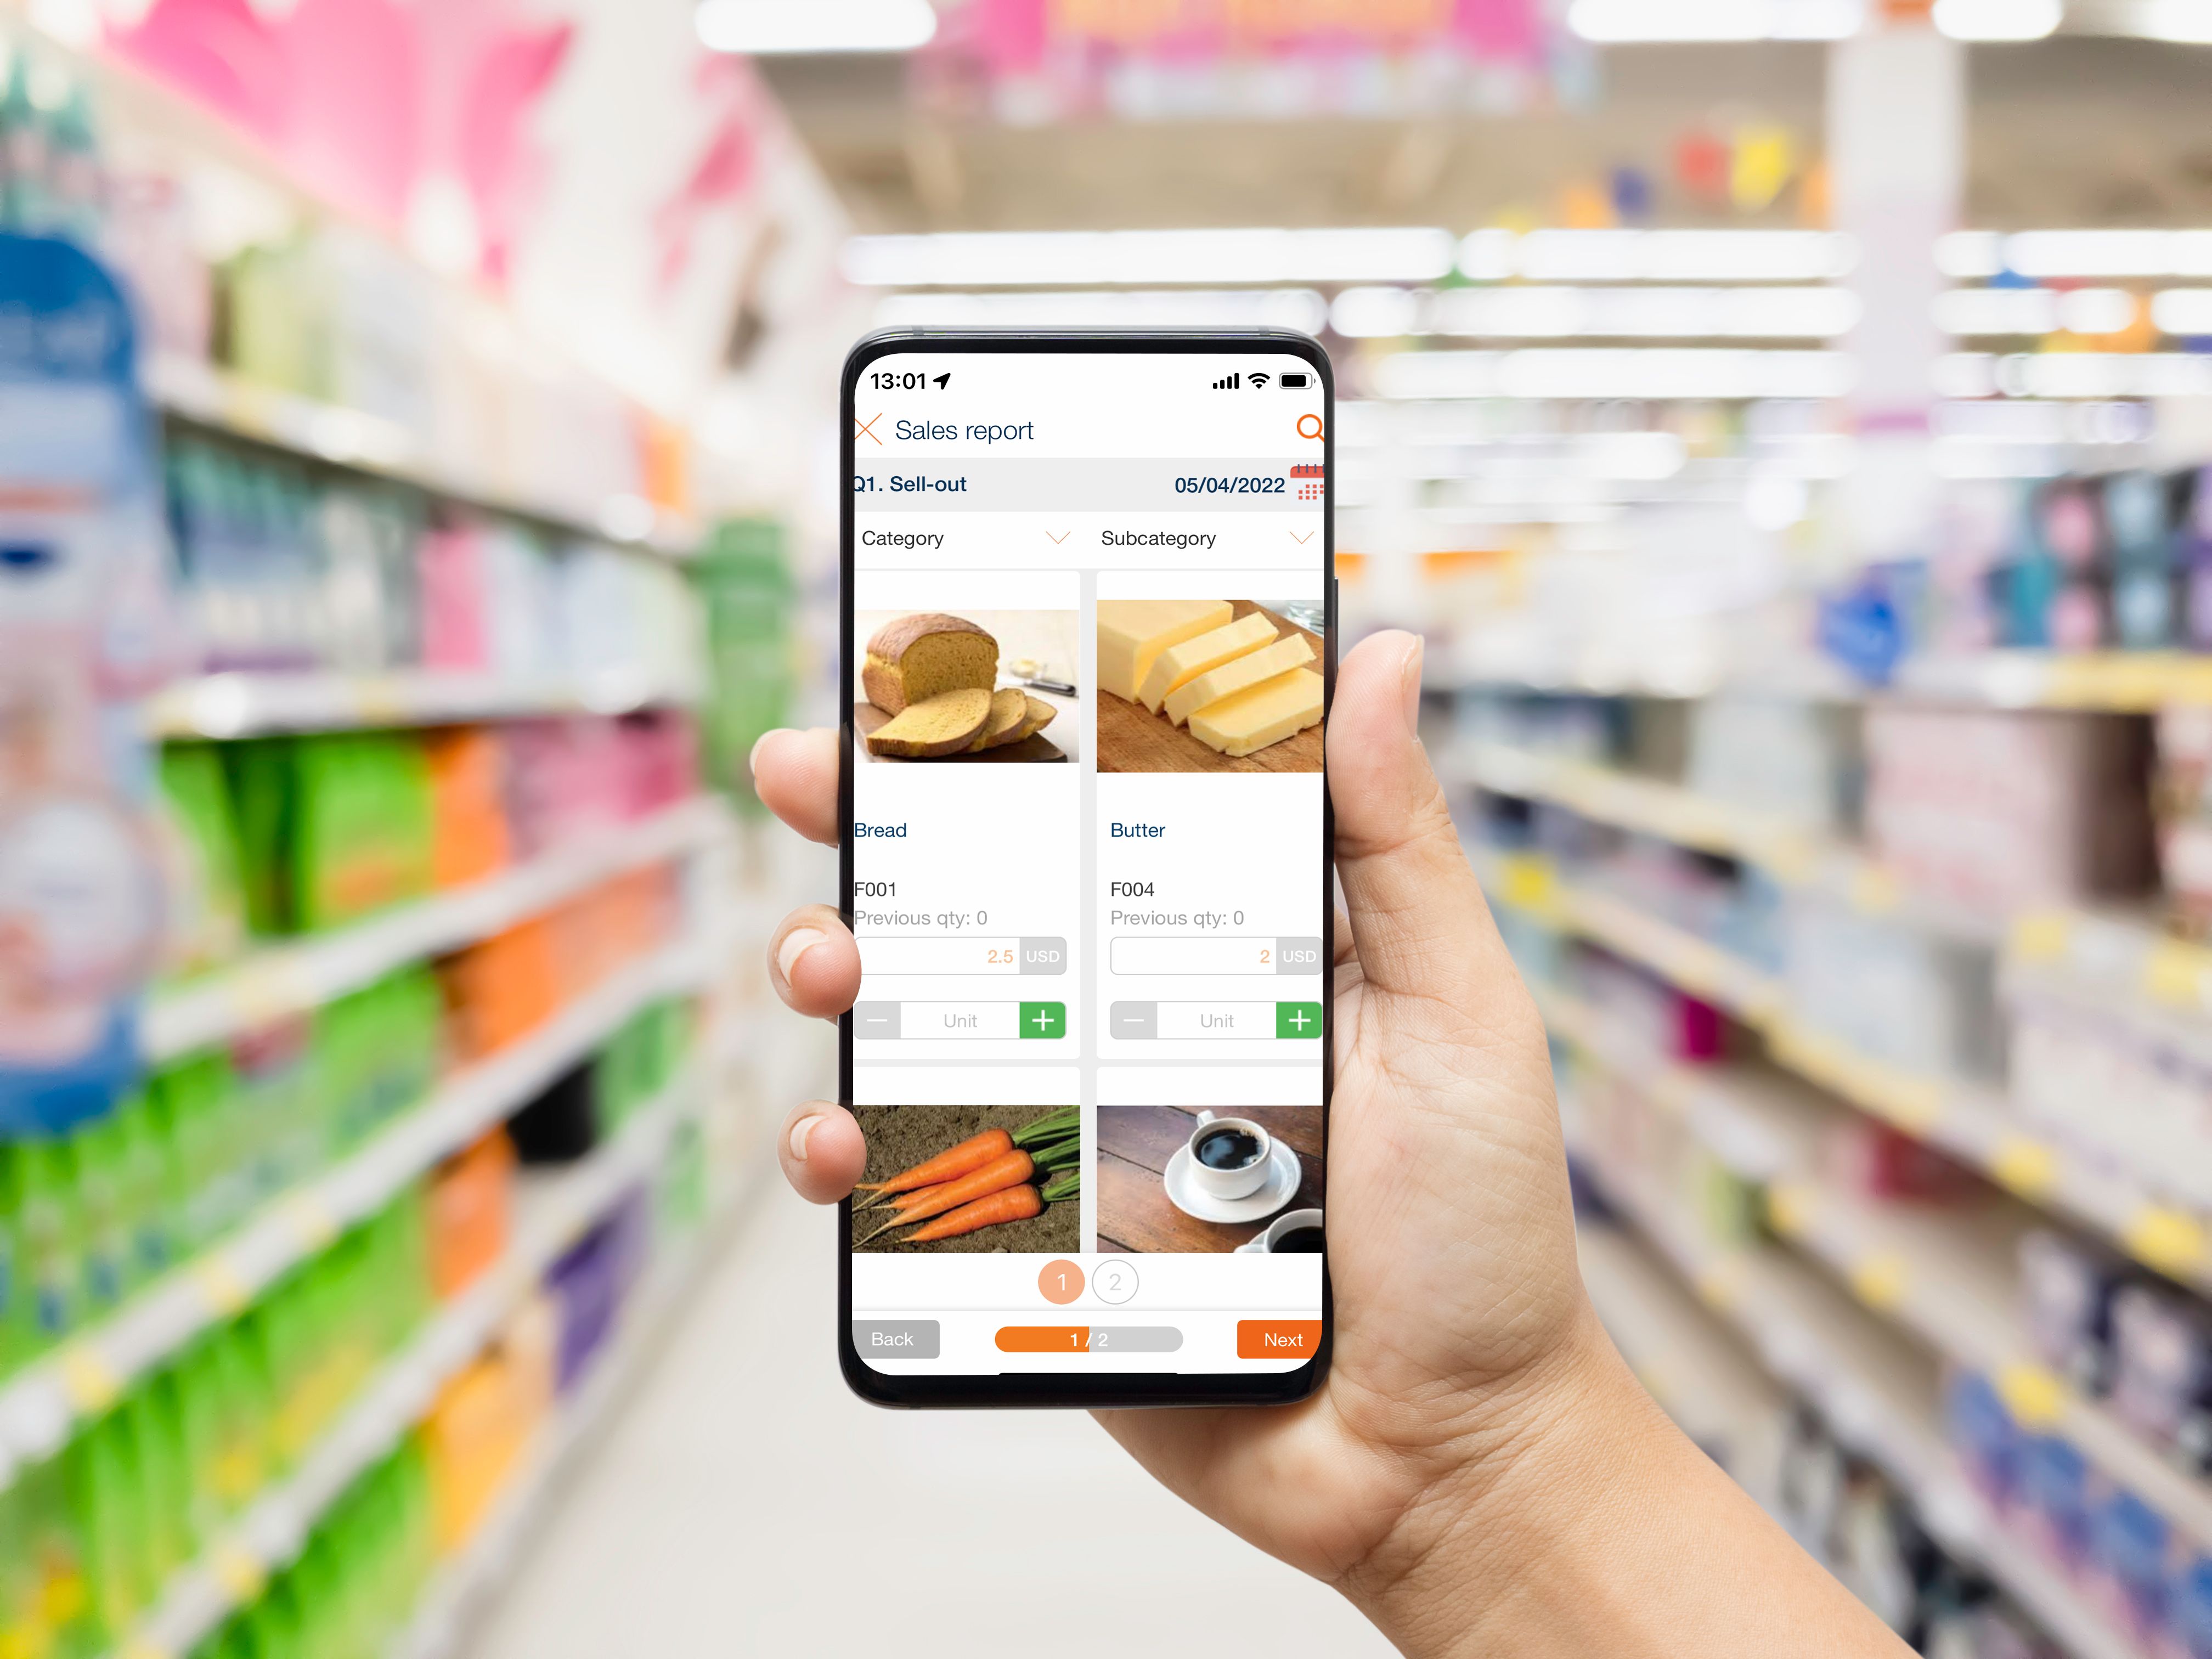 Brands introduce FieldCheck to assign merchandising items to visual merchandisers to check the execution quality via the app